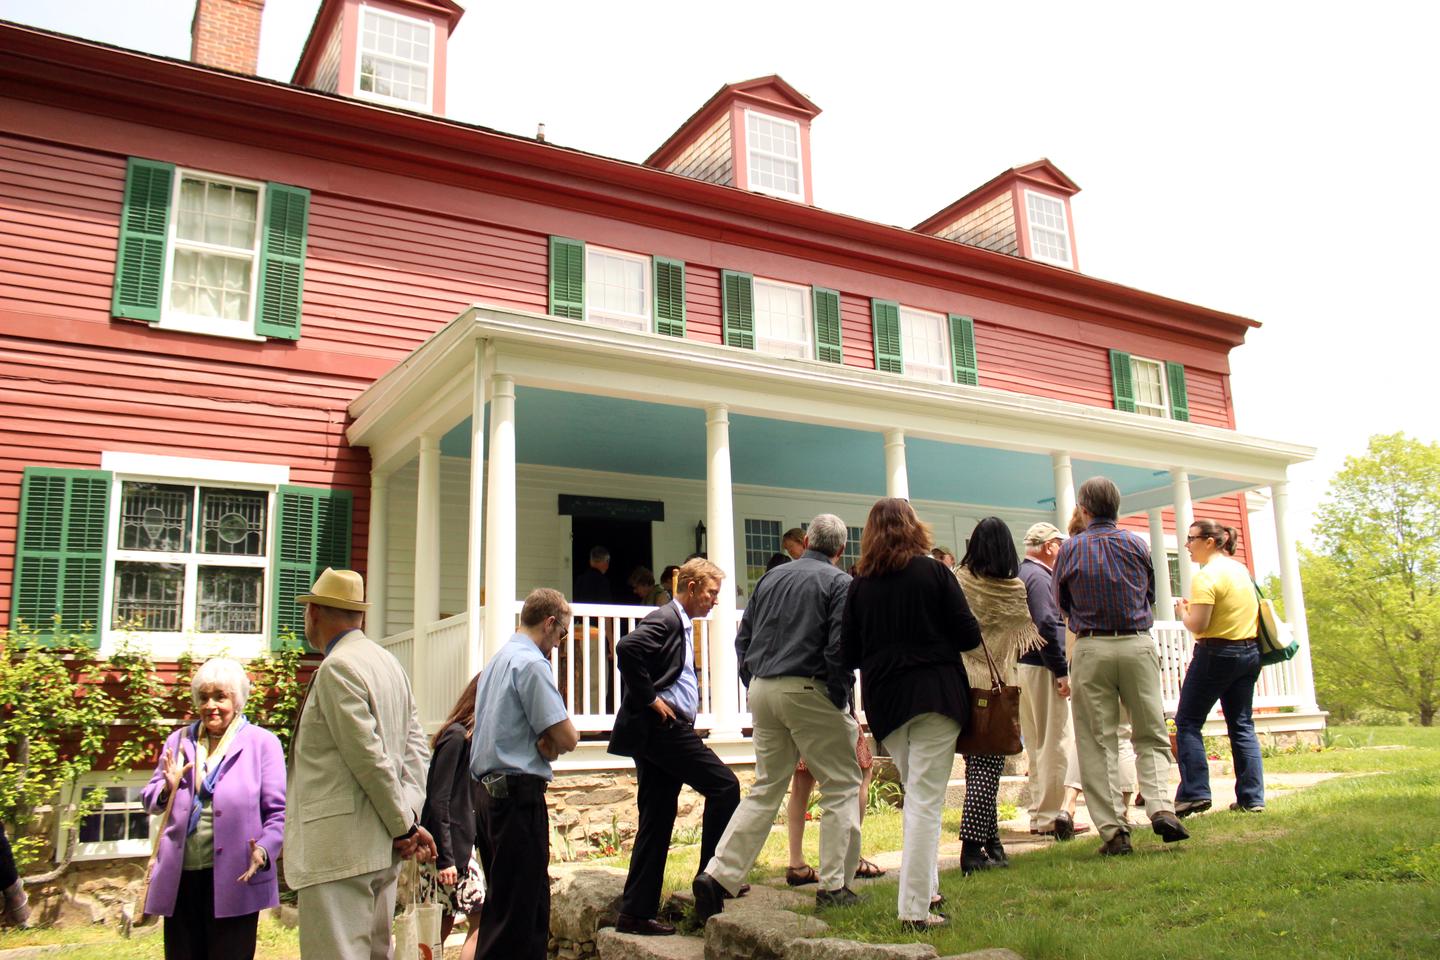 Opening of the Weir House - May 2014Visitors wait in line to enter the Weir House on the first day it was opened, May 2014.